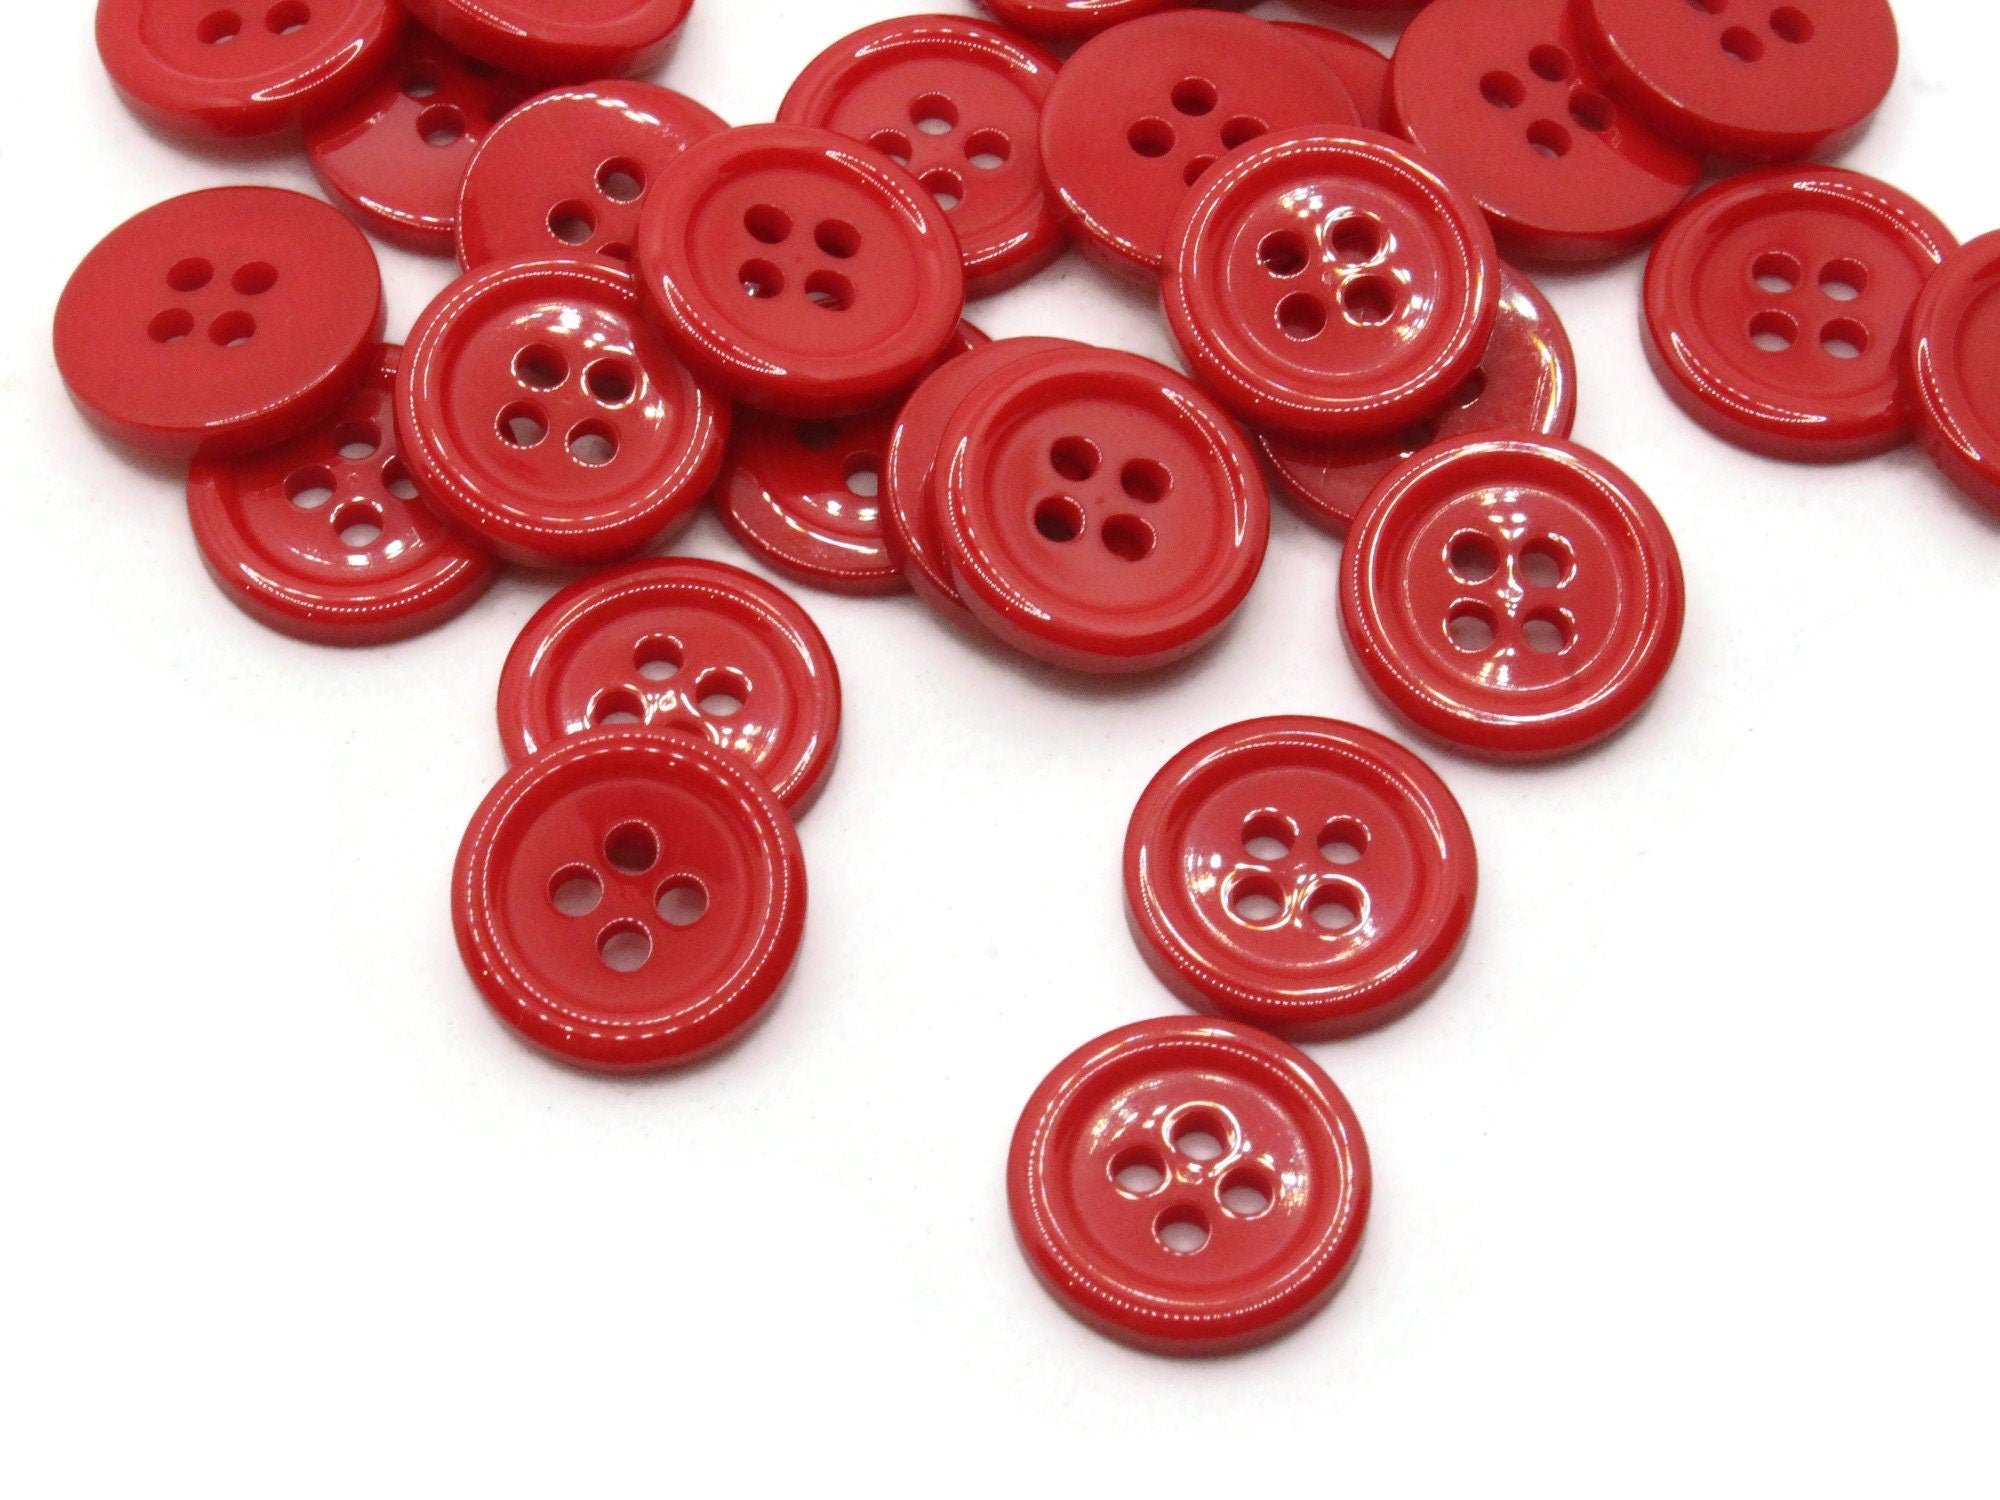 Red Buttons, 4 Hole Sewing/Crafts Buttons 15mm - 24 Pieces (090